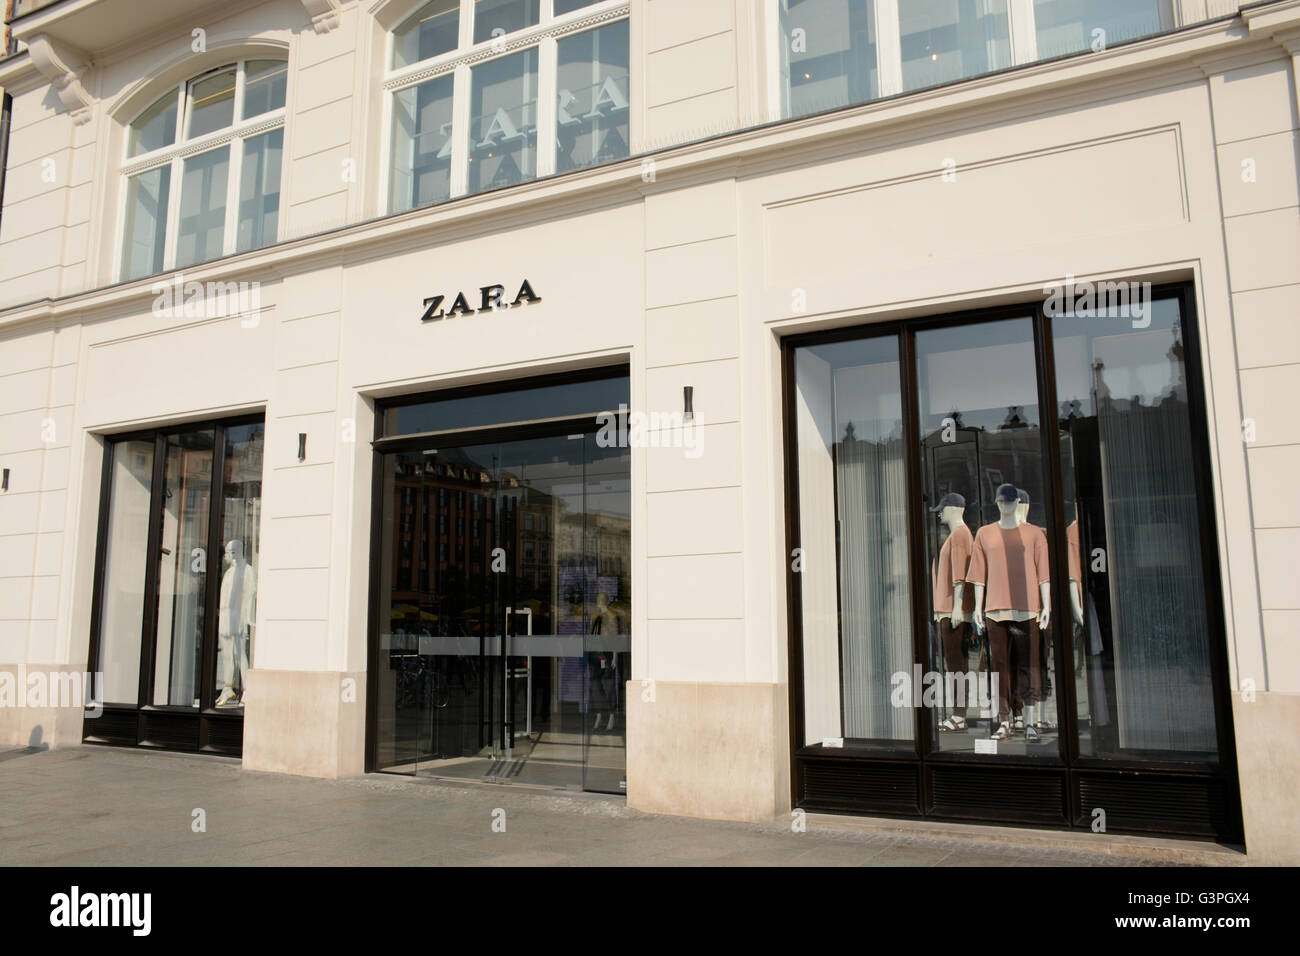 Zara Boutique High Resolution Stock Photography and Images - Alamy